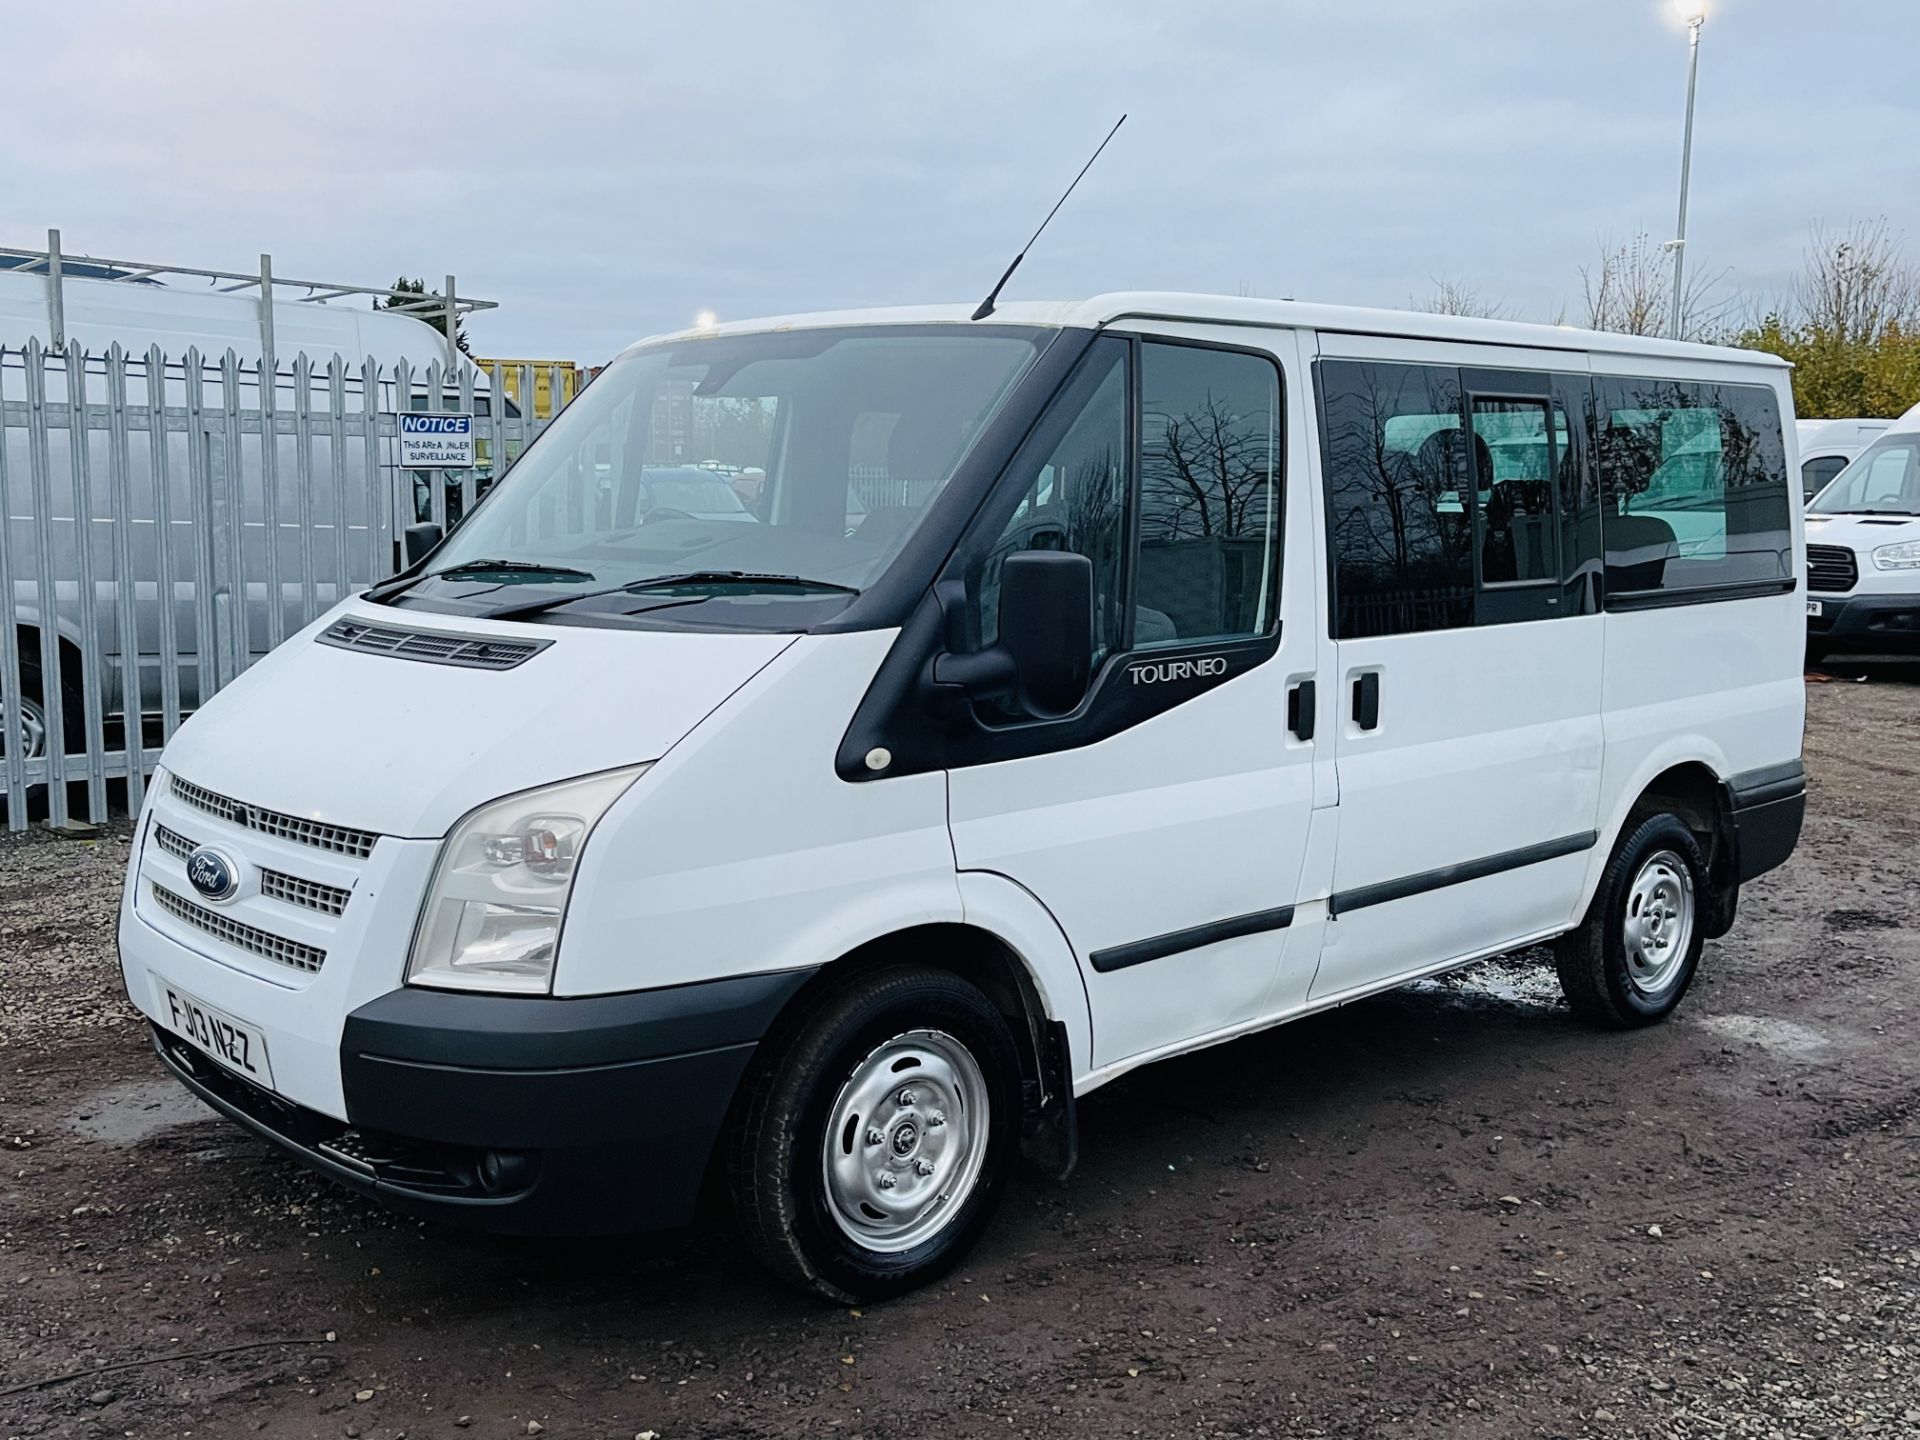 ** ON SALE ** Ford Transit Toureno 2.2 TDCI Trend 2013 '13 Reg' 9 seats - Air Con - Cruise Control** - Image 5 of 25